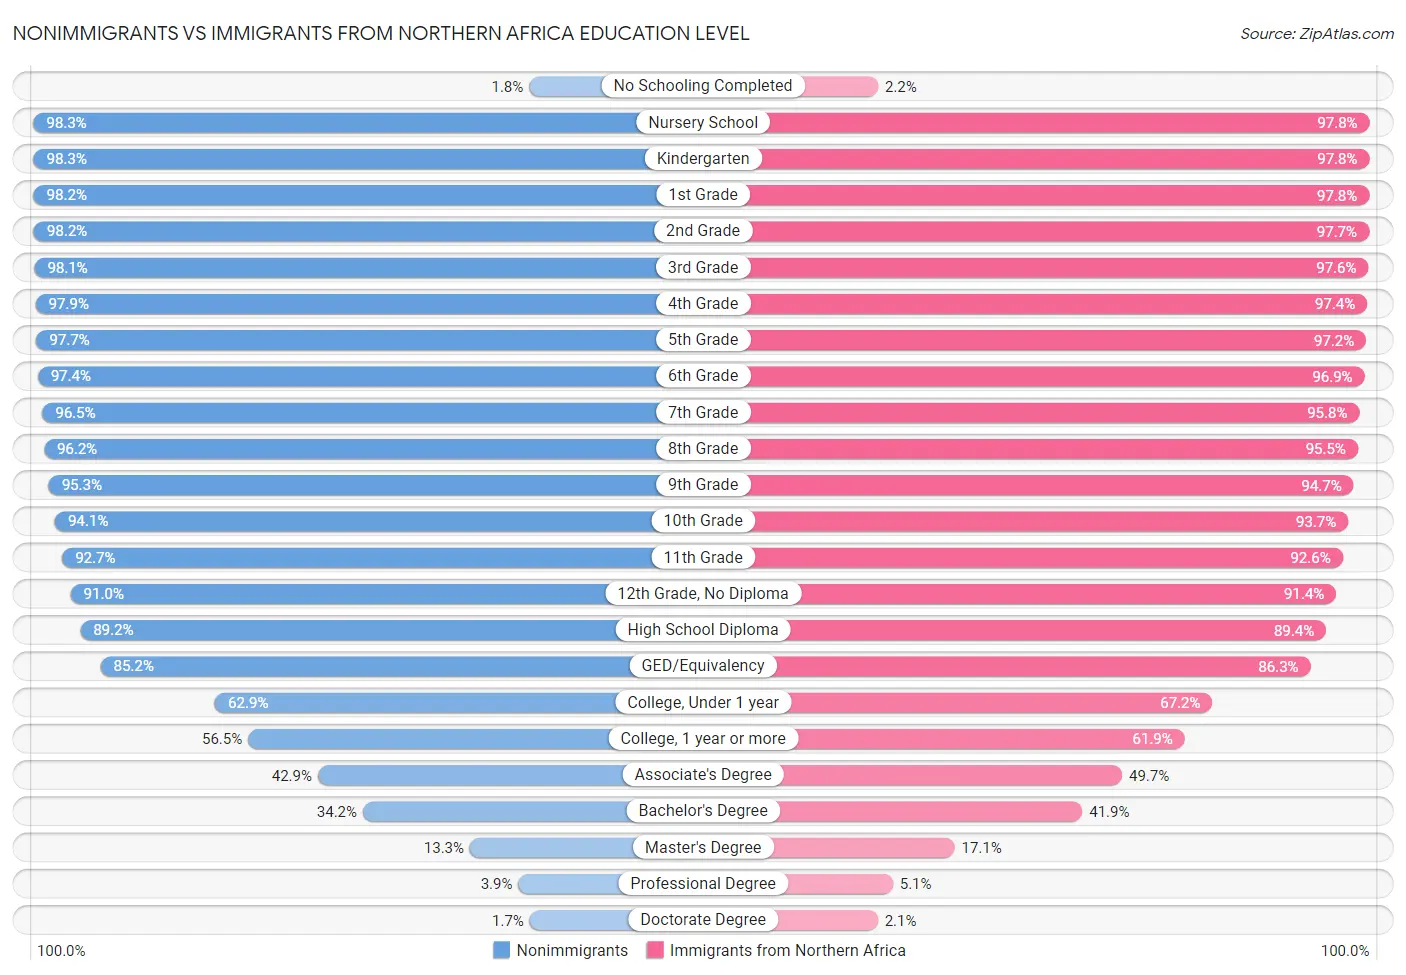 Nonimmigrants vs Immigrants from Northern Africa Education Level